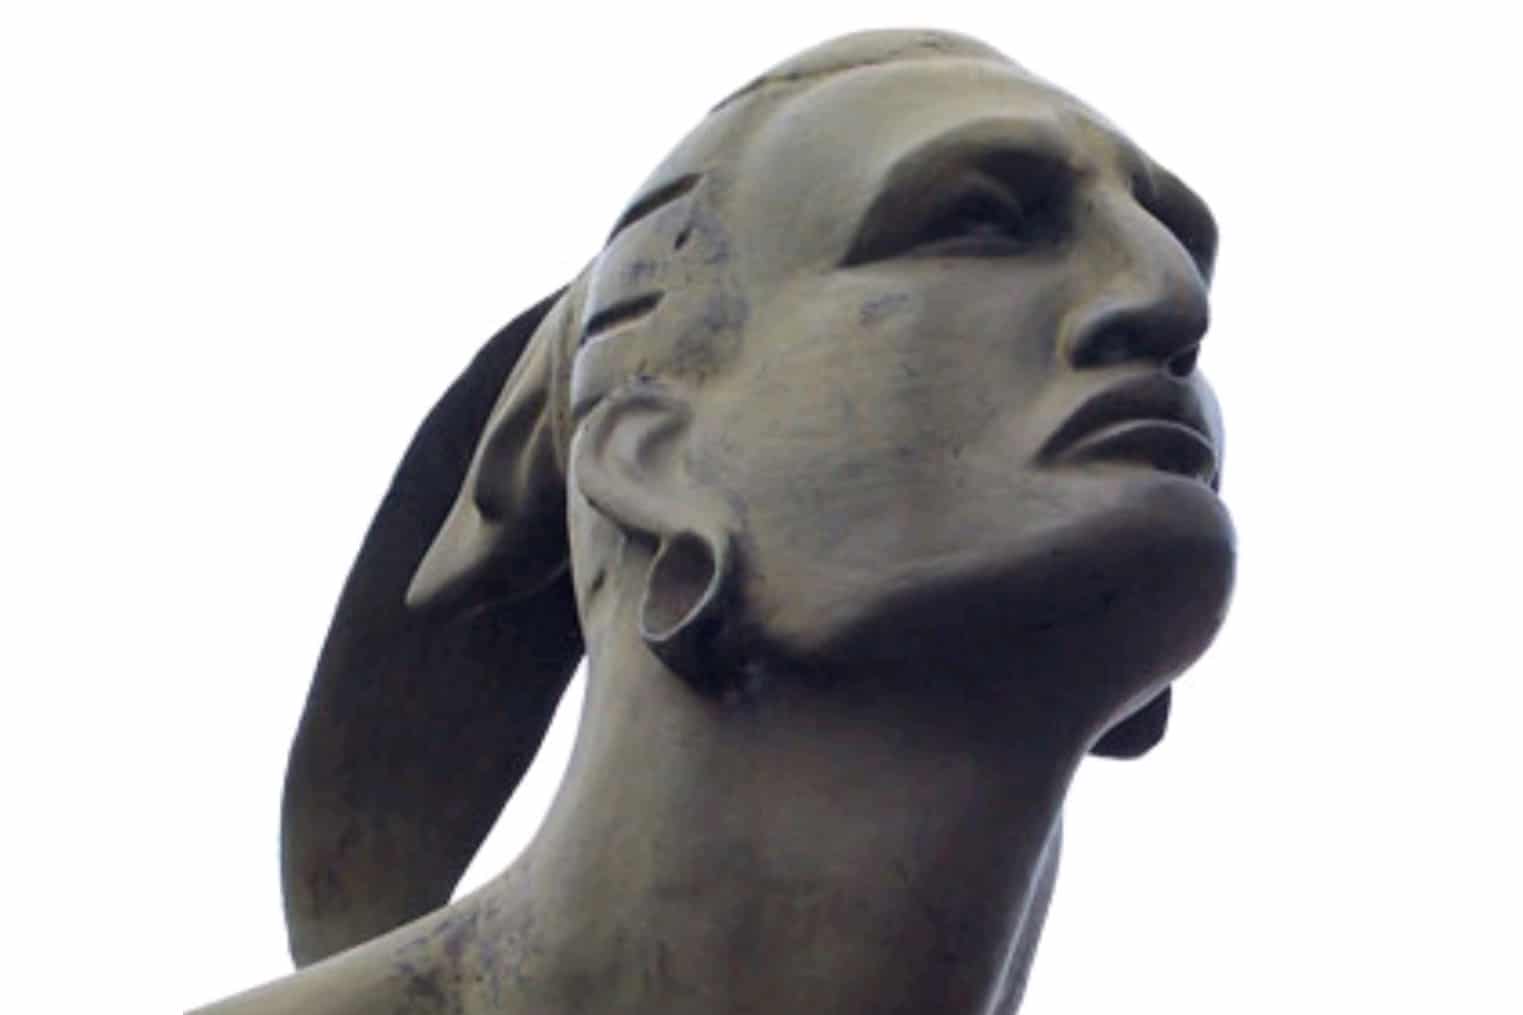 | Bust from the statue of Taino Chief Hatuey in Baracoa Cuba | MR Online